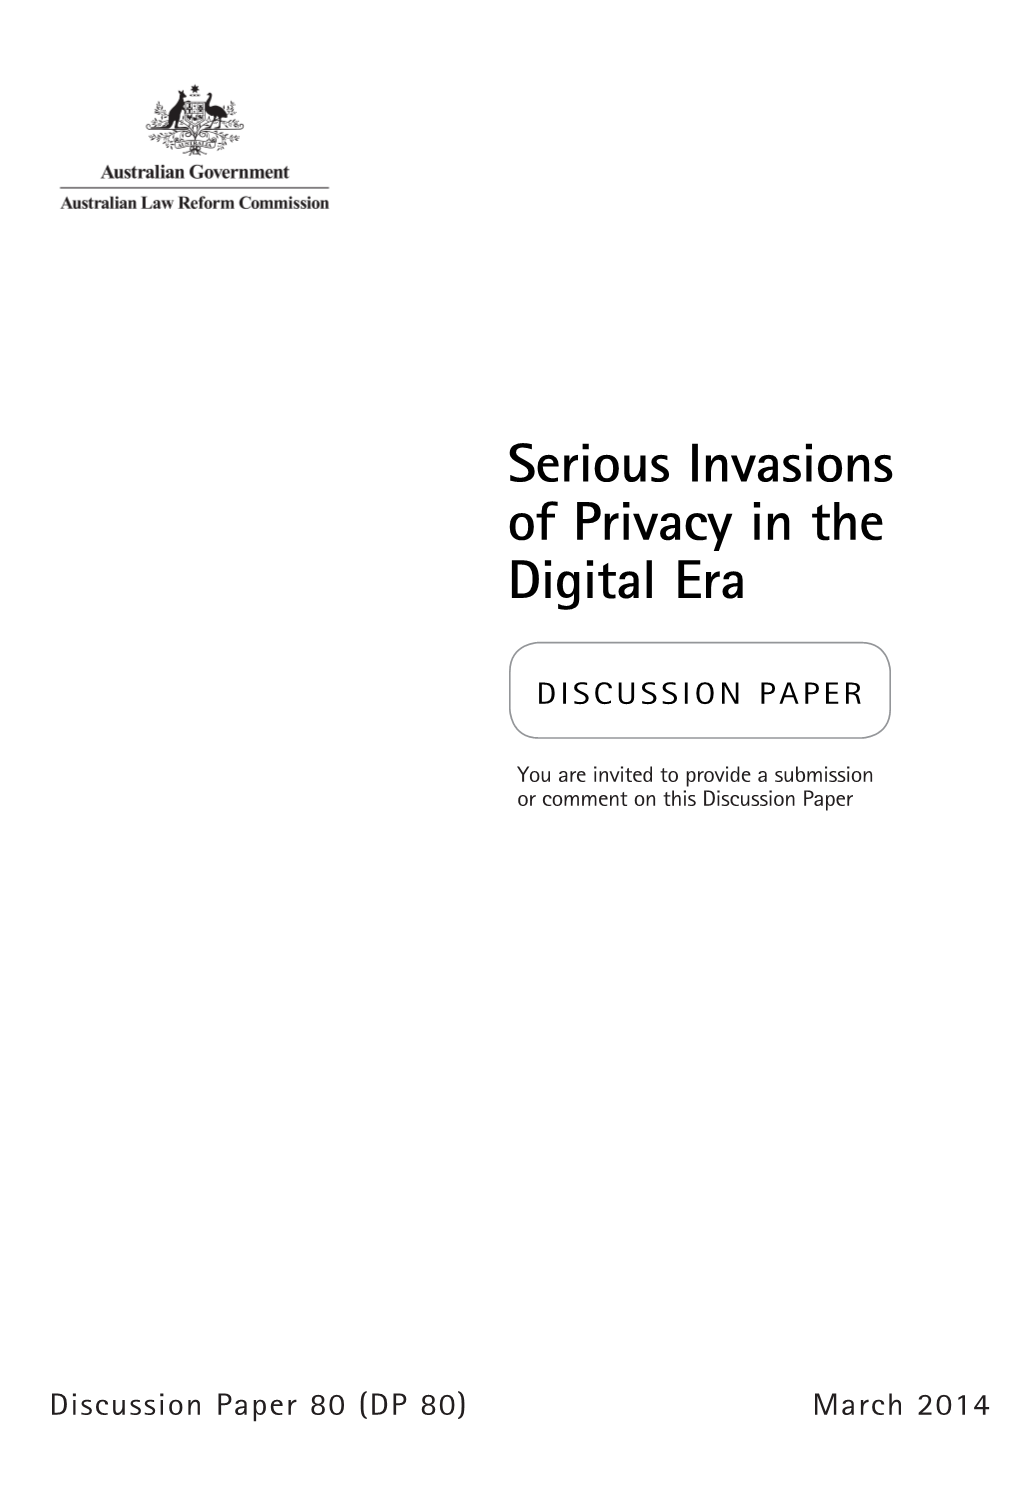 Serious Invasions of Privacy in the Digital Era